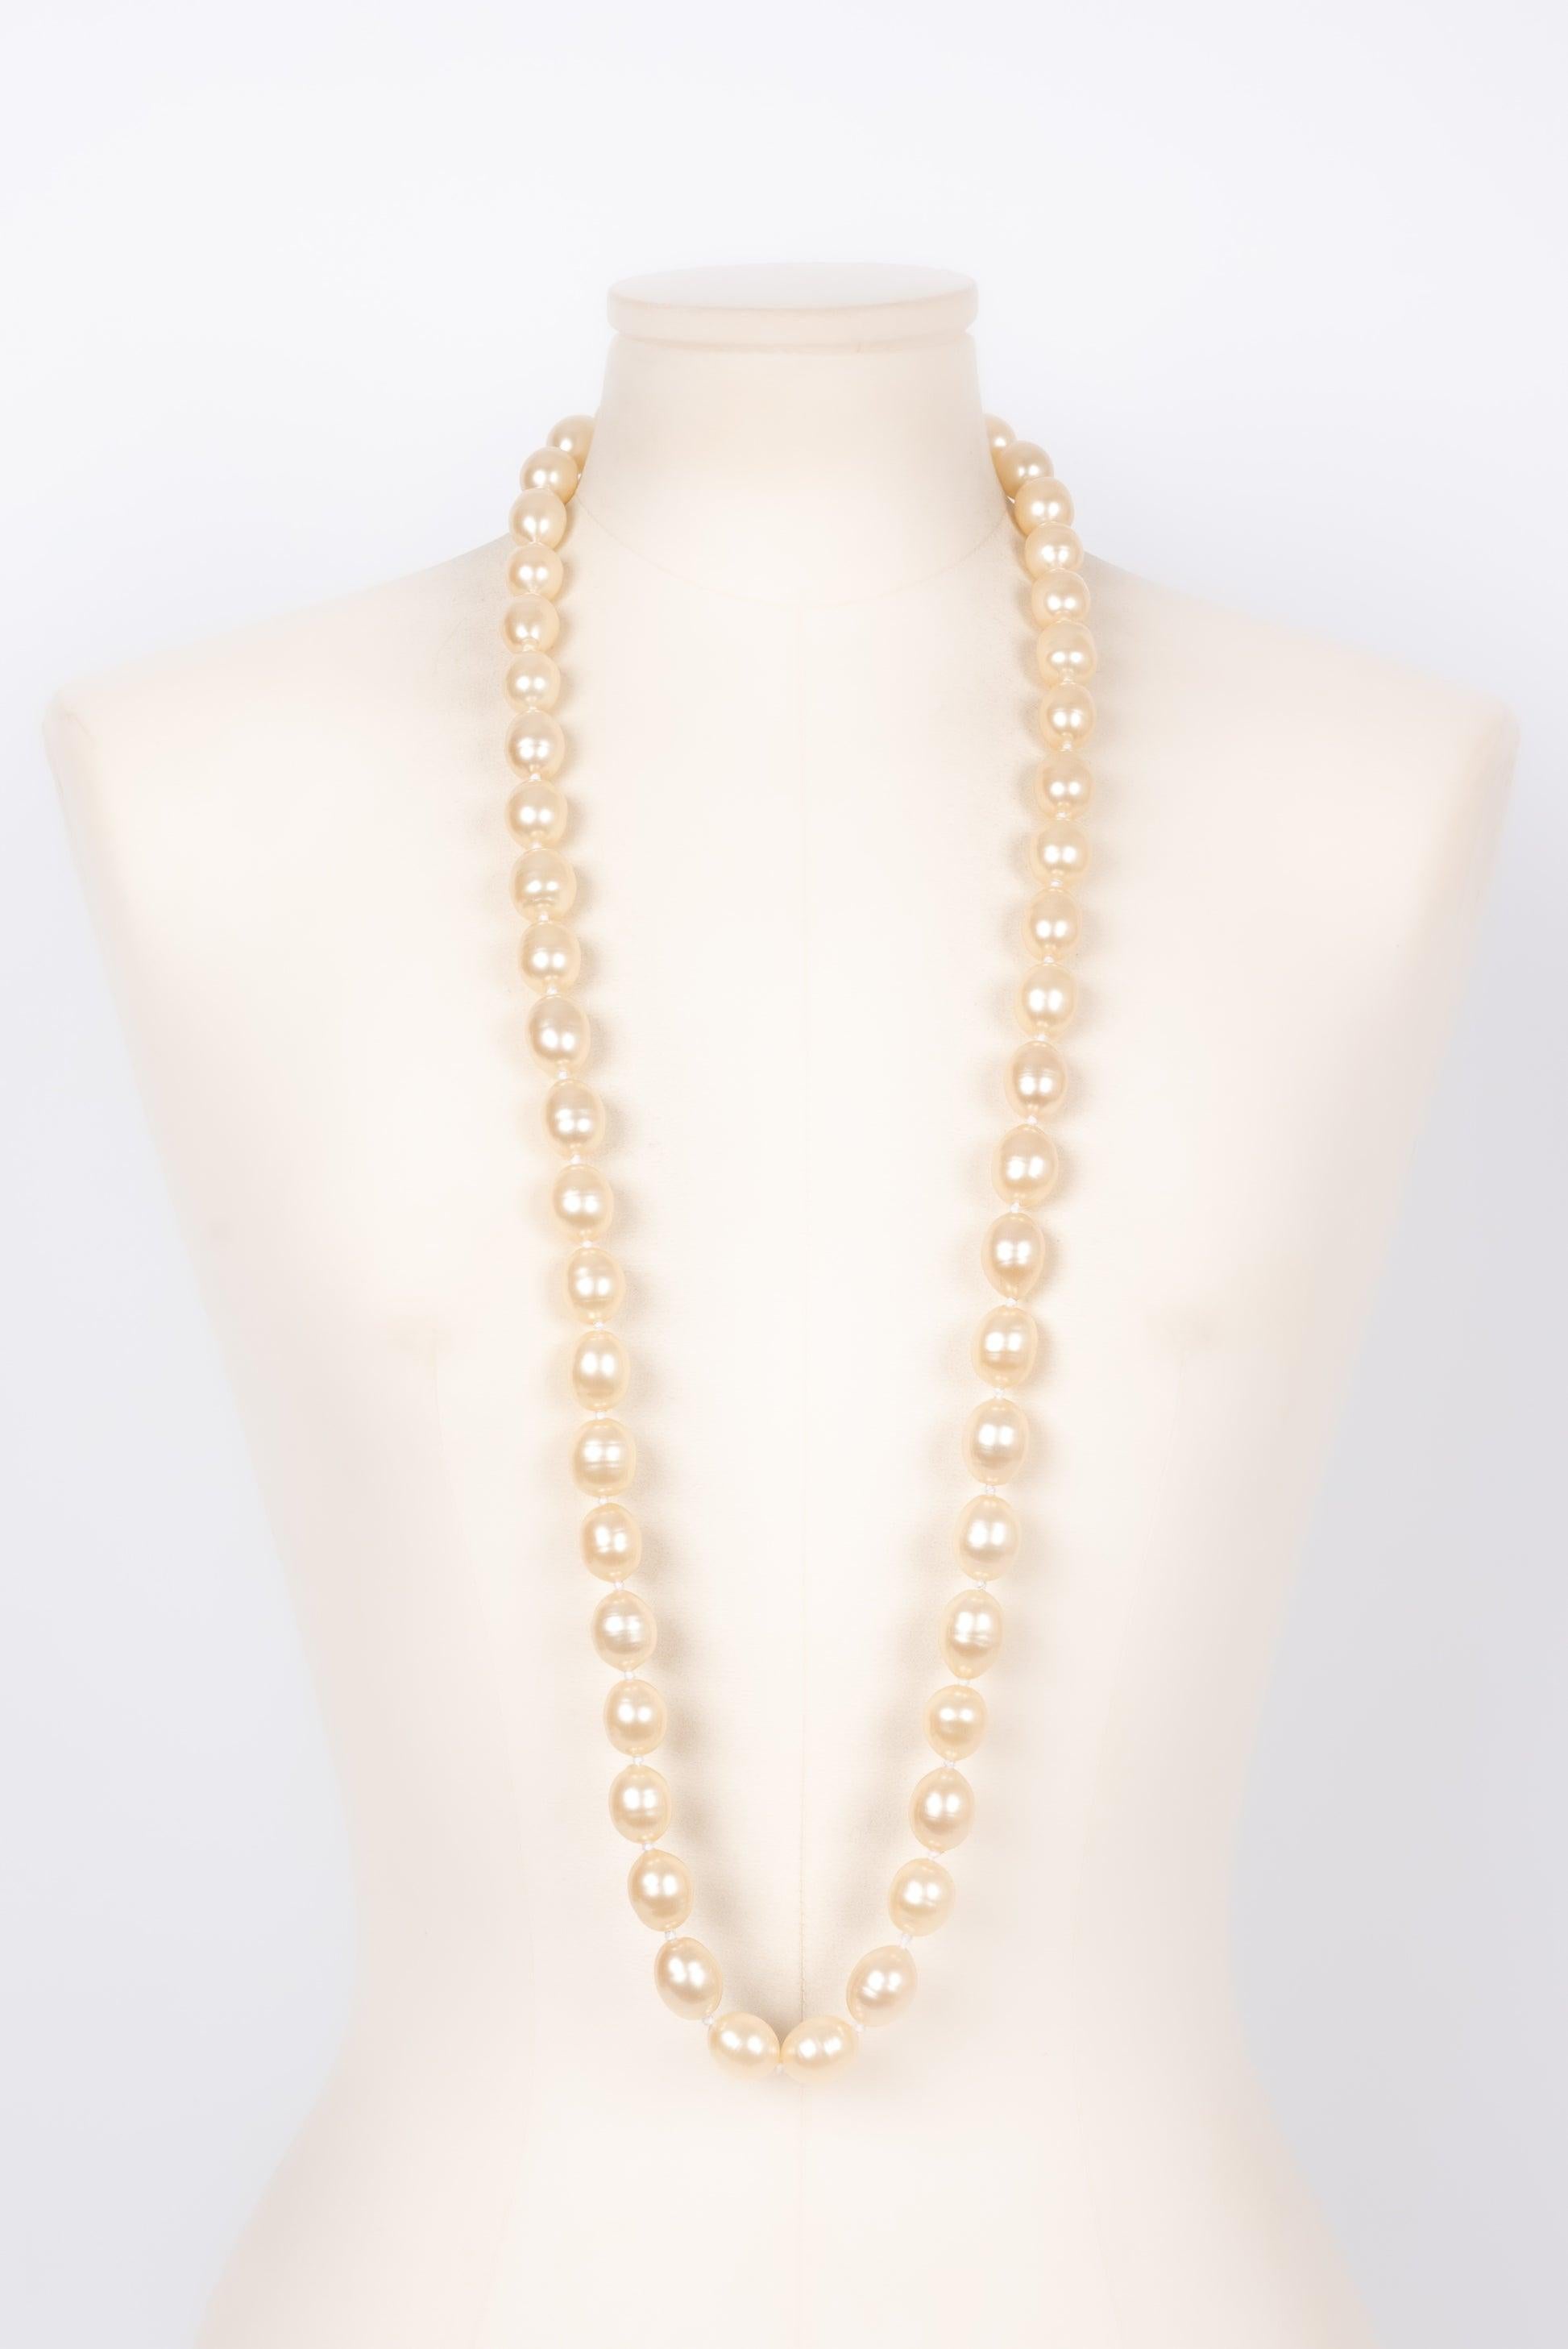 Chanel Necklace in Costume Pearly Beads and Gold-Plated Metal, 1990s For Sale 1